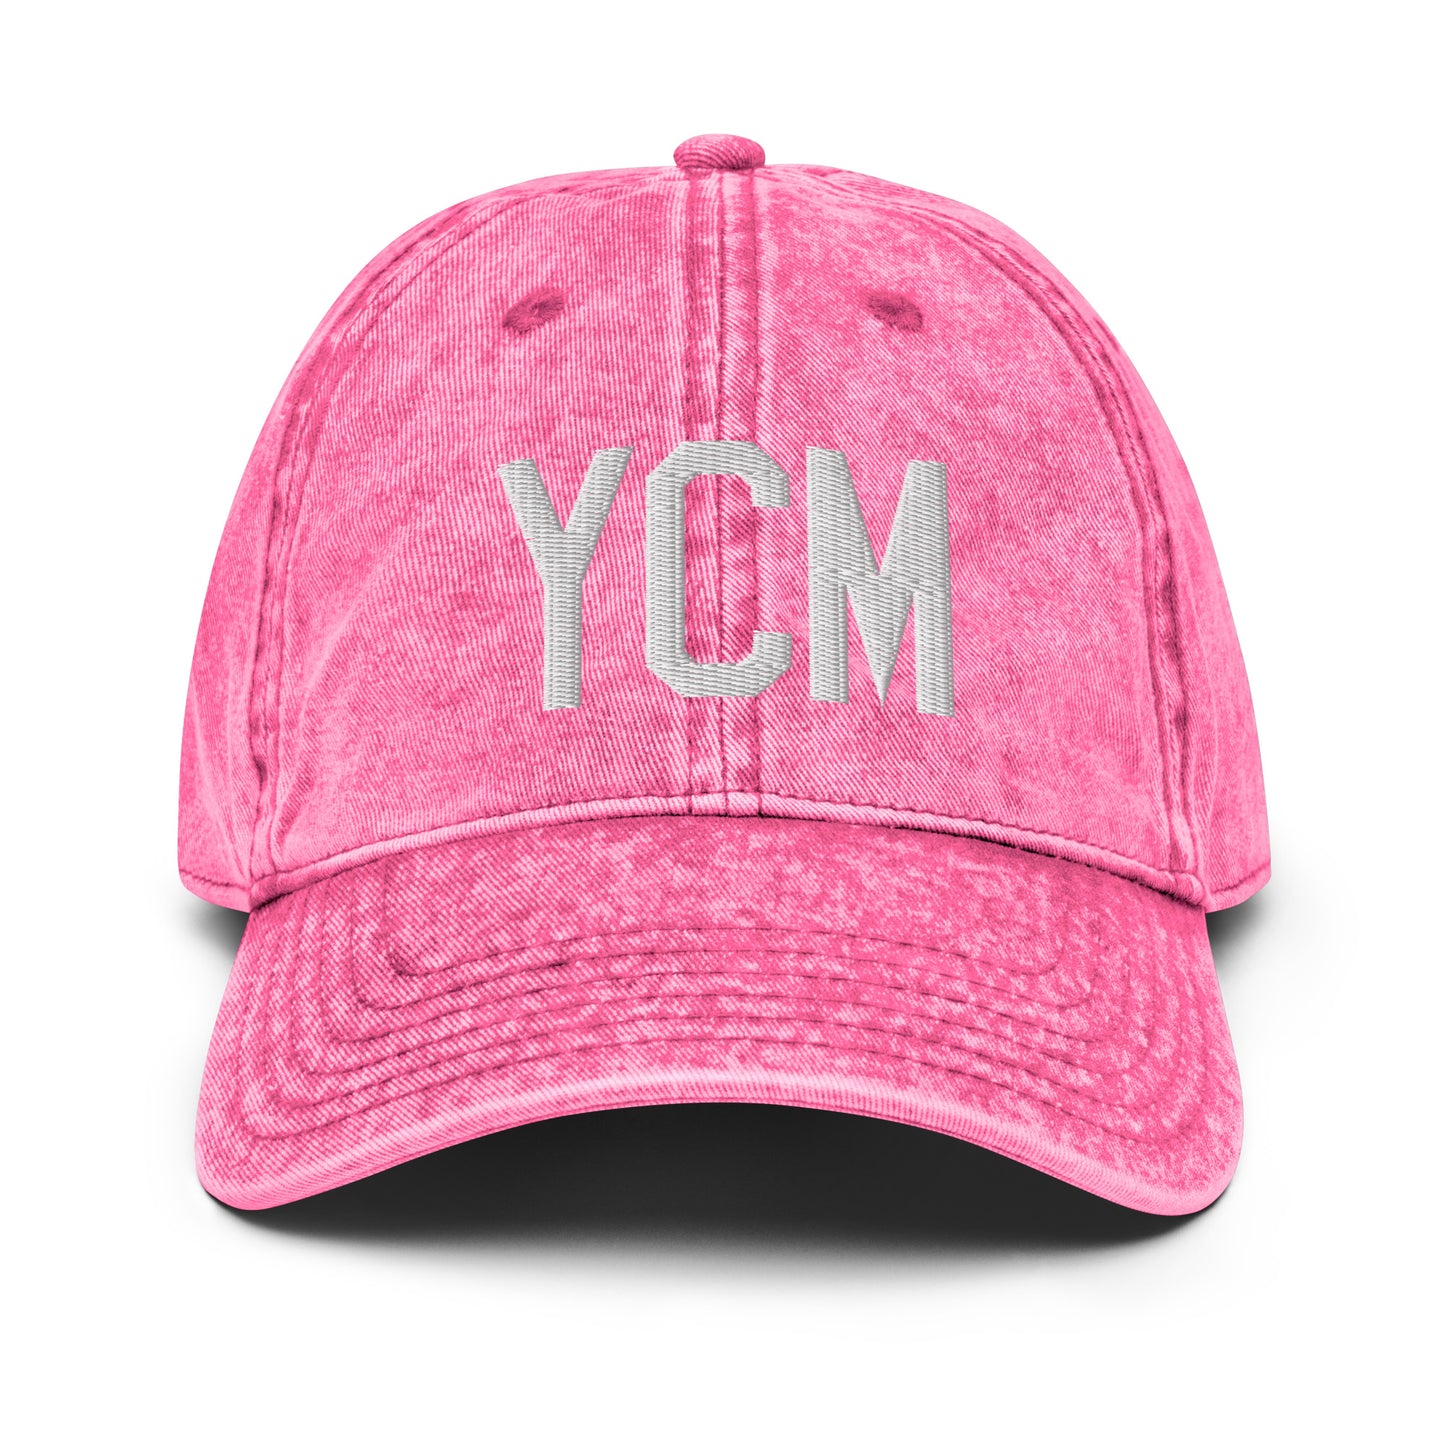 Airport Code Twill Cap - White • YCM St. Catharines • YHM Designs - Image 25